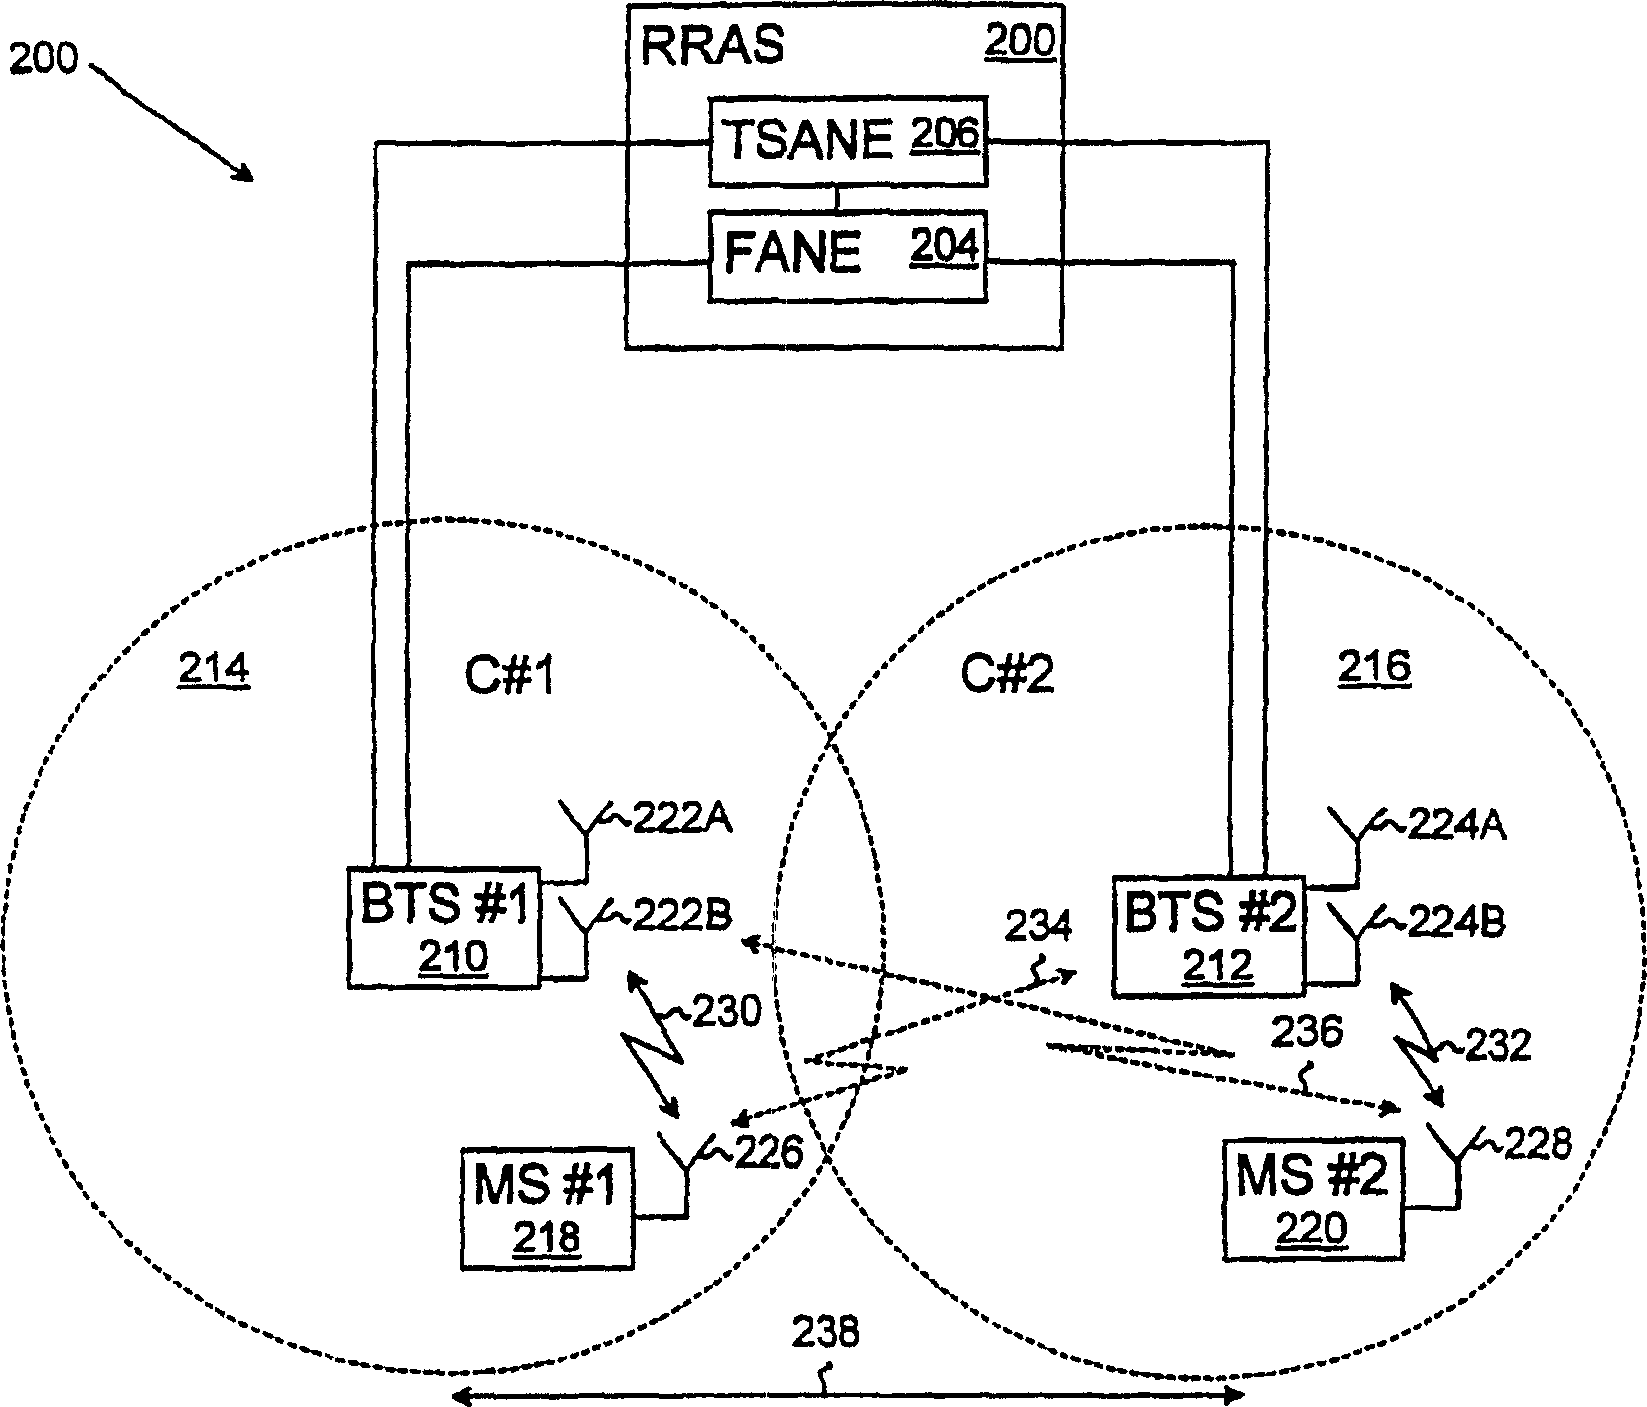 Method, system, apparatus and computer program for allocating radio resources in TDMA cellular telecommunications system